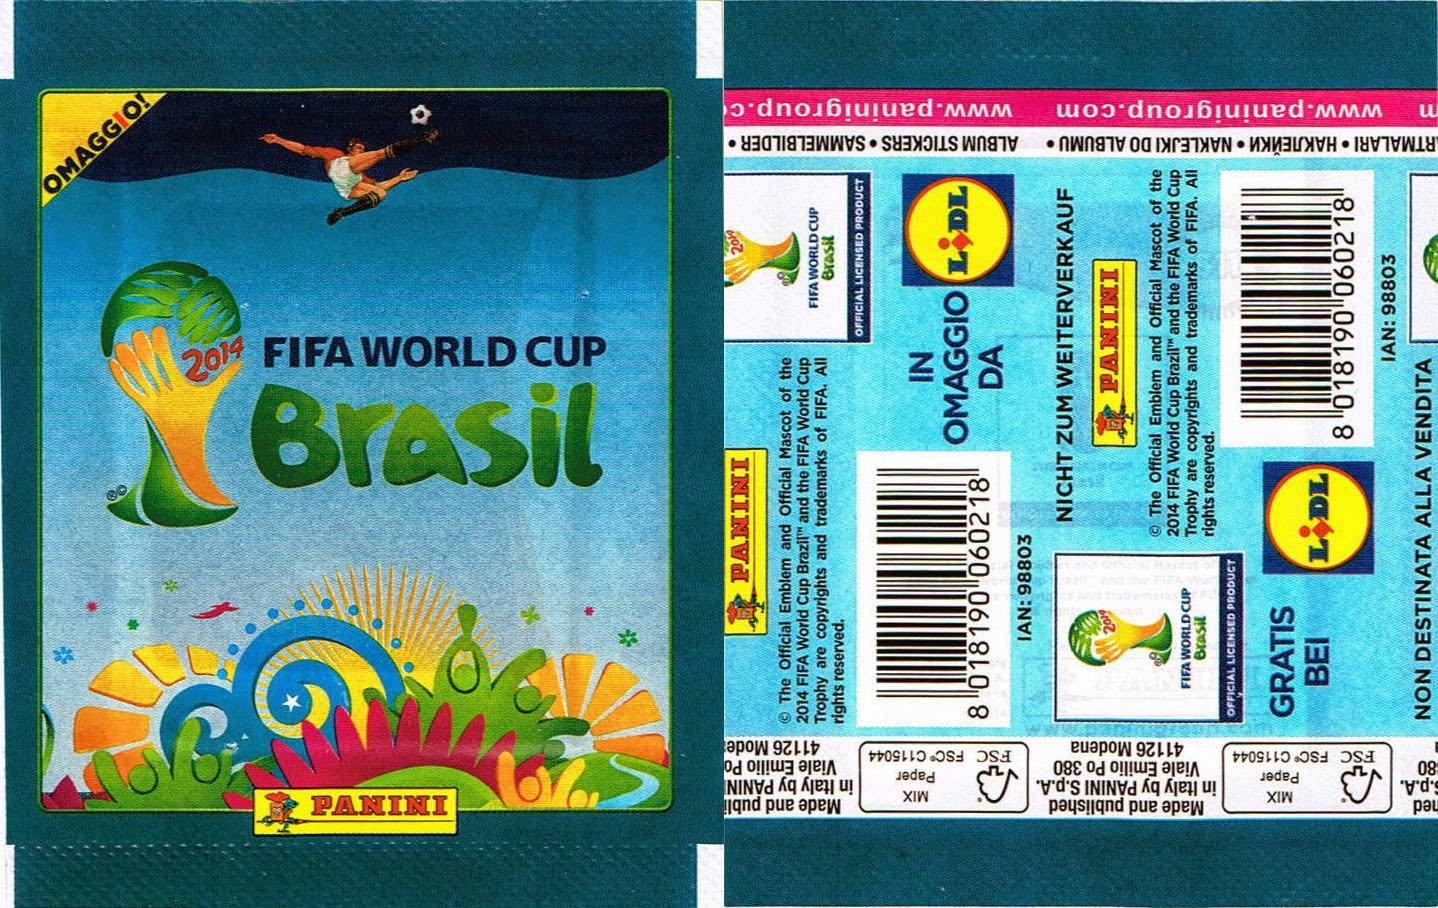 Panini 1 Tüte Road to FIFA World Cup 2014 Bustina Pochette Packet Pack Sobre WM 